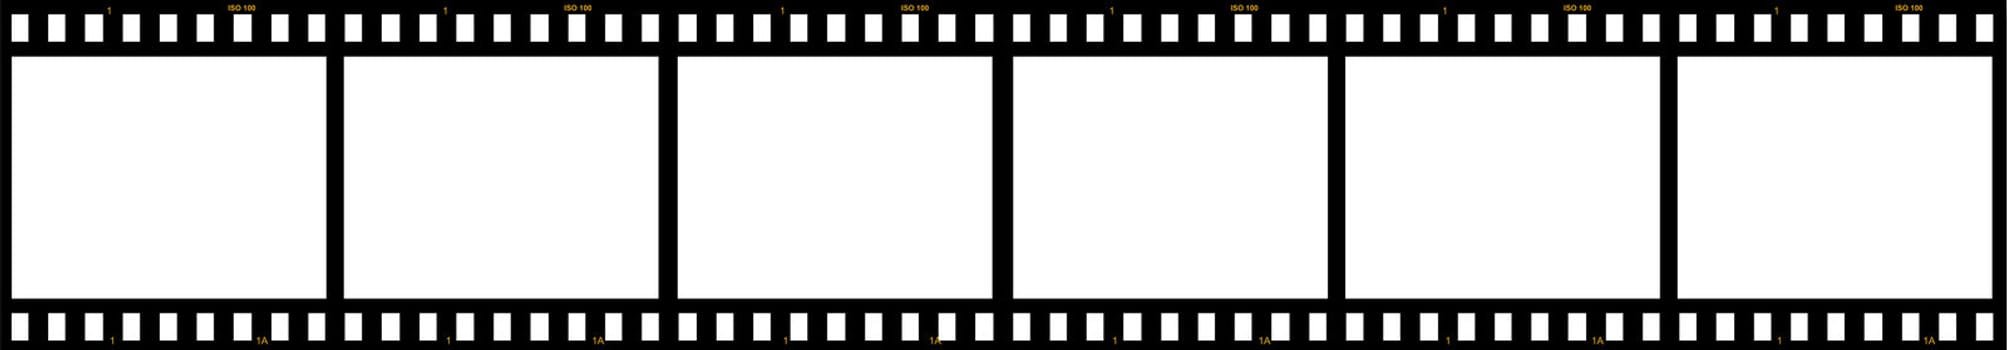 Six blank frames of film in series. The film edge also reads "ISO 100".